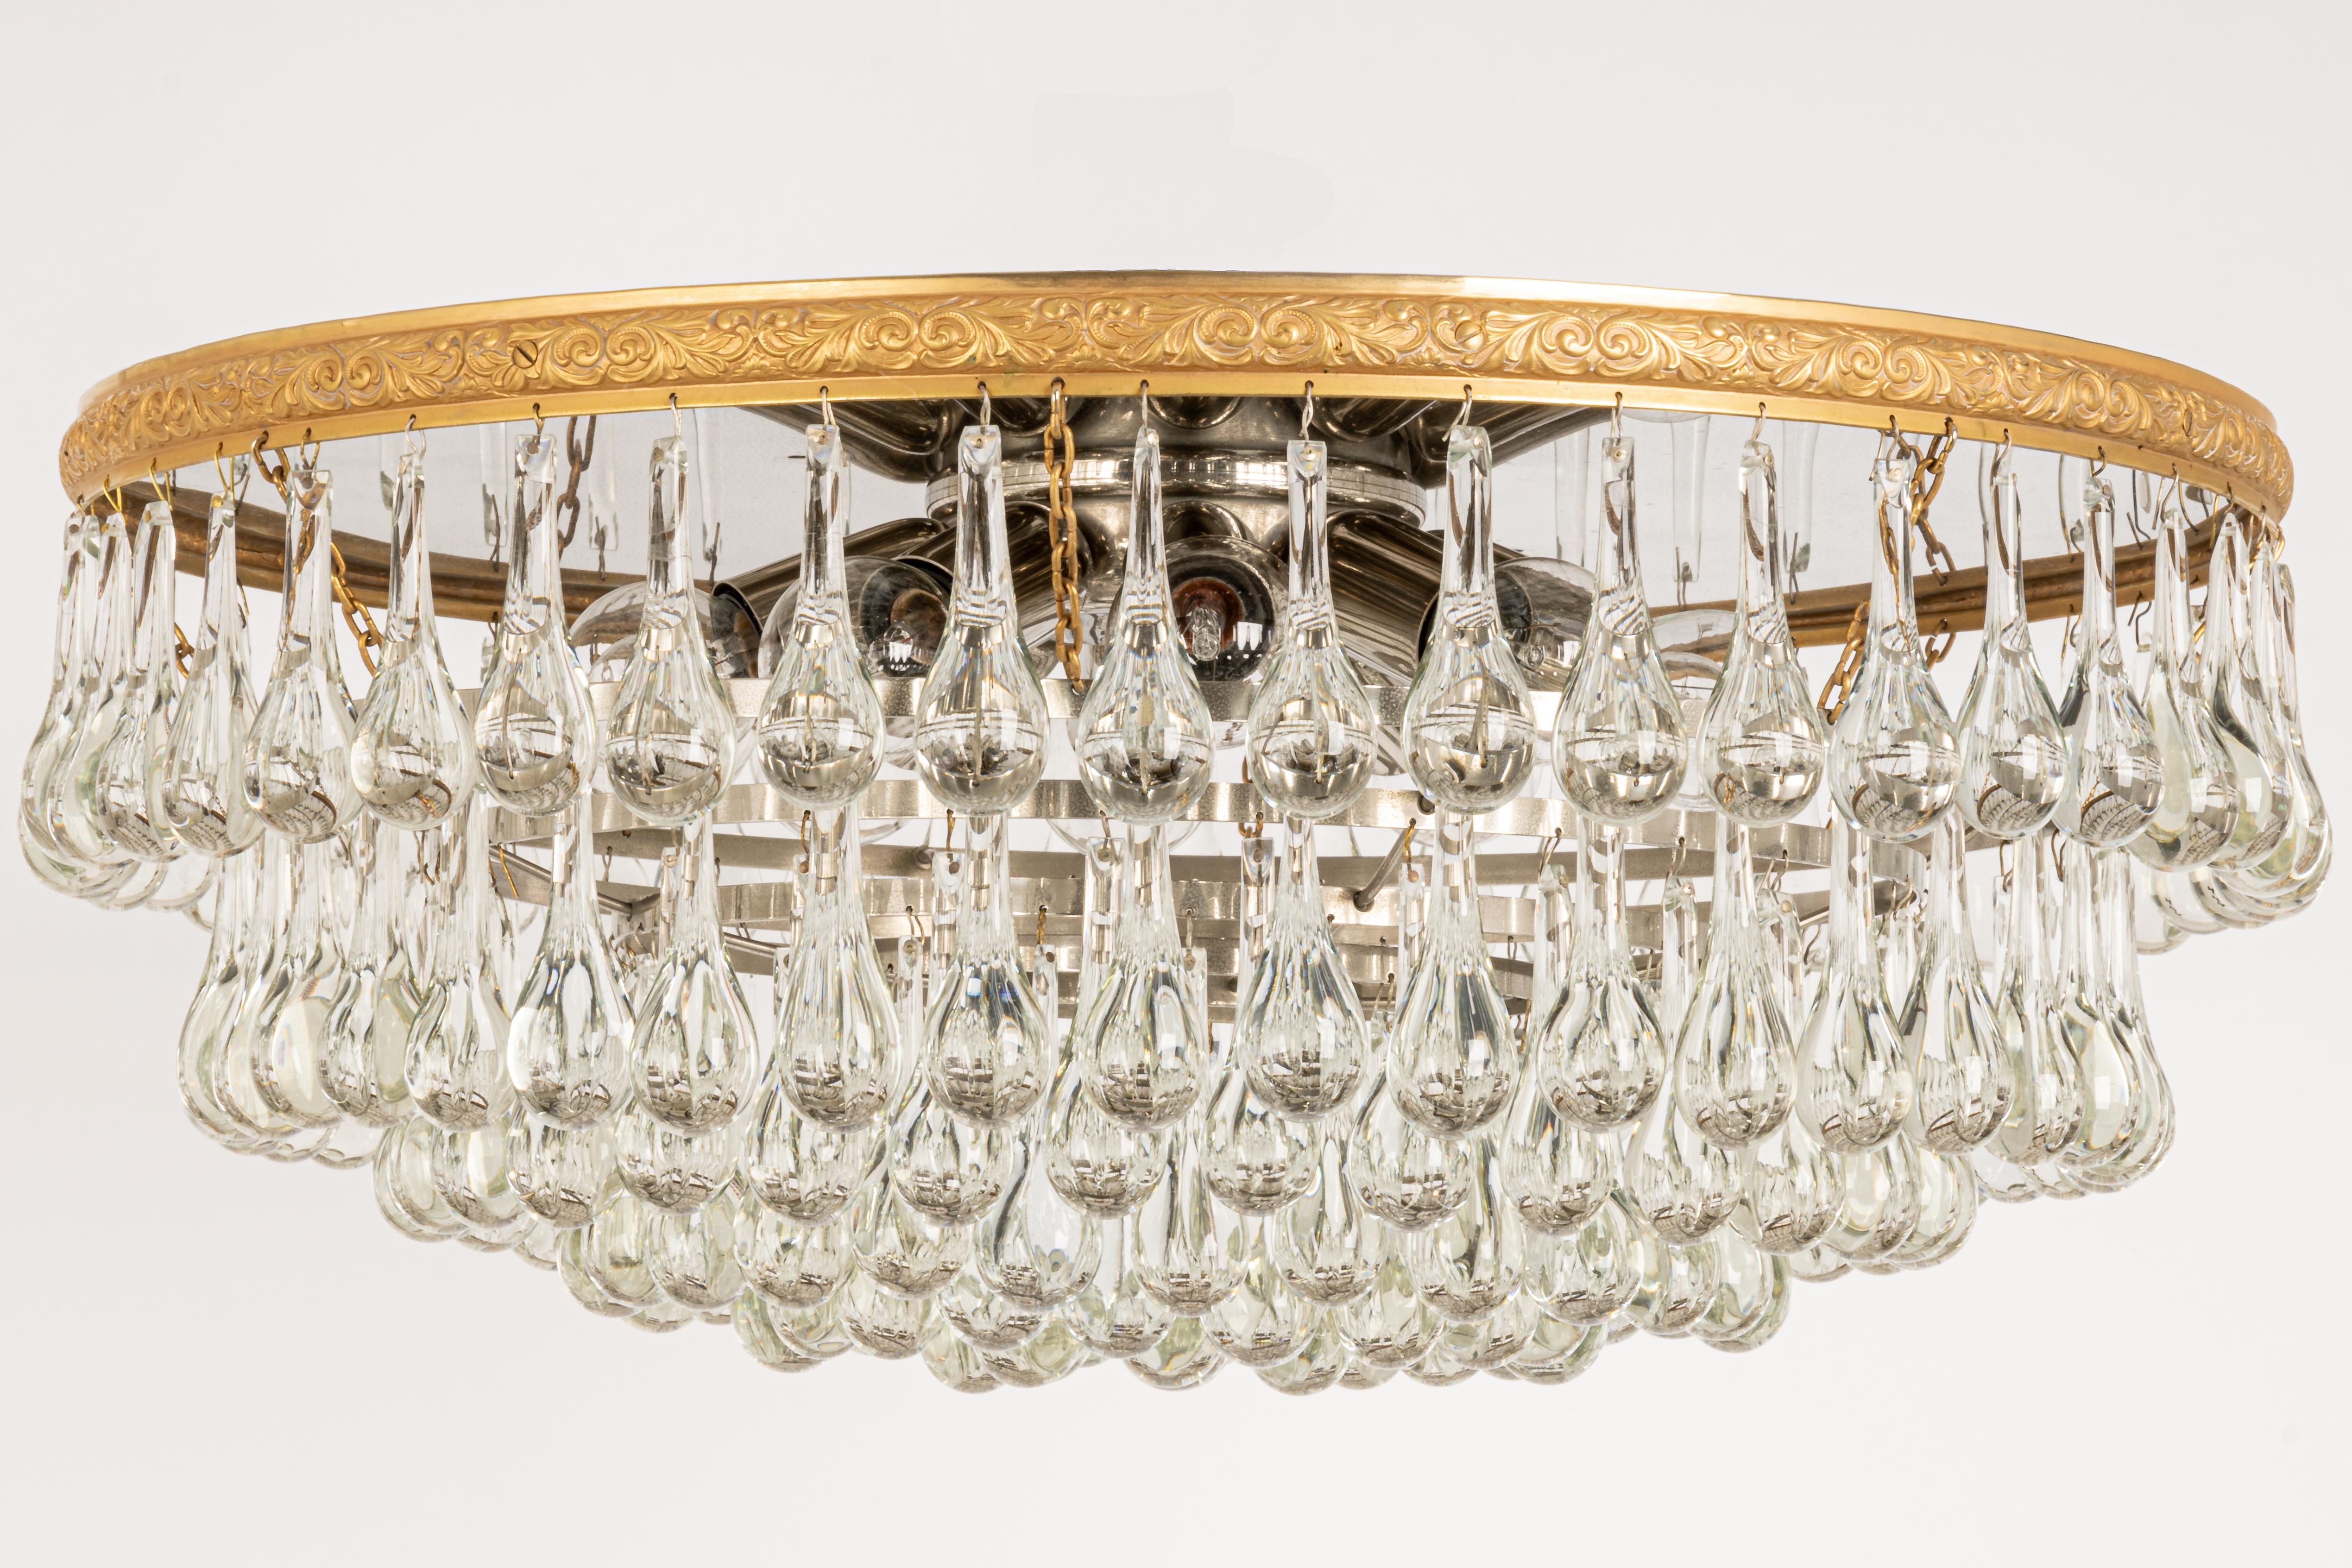 Large Murano Glass Tear Drop Chandelier by C.Palme, Germany, 1970s For Sale 2